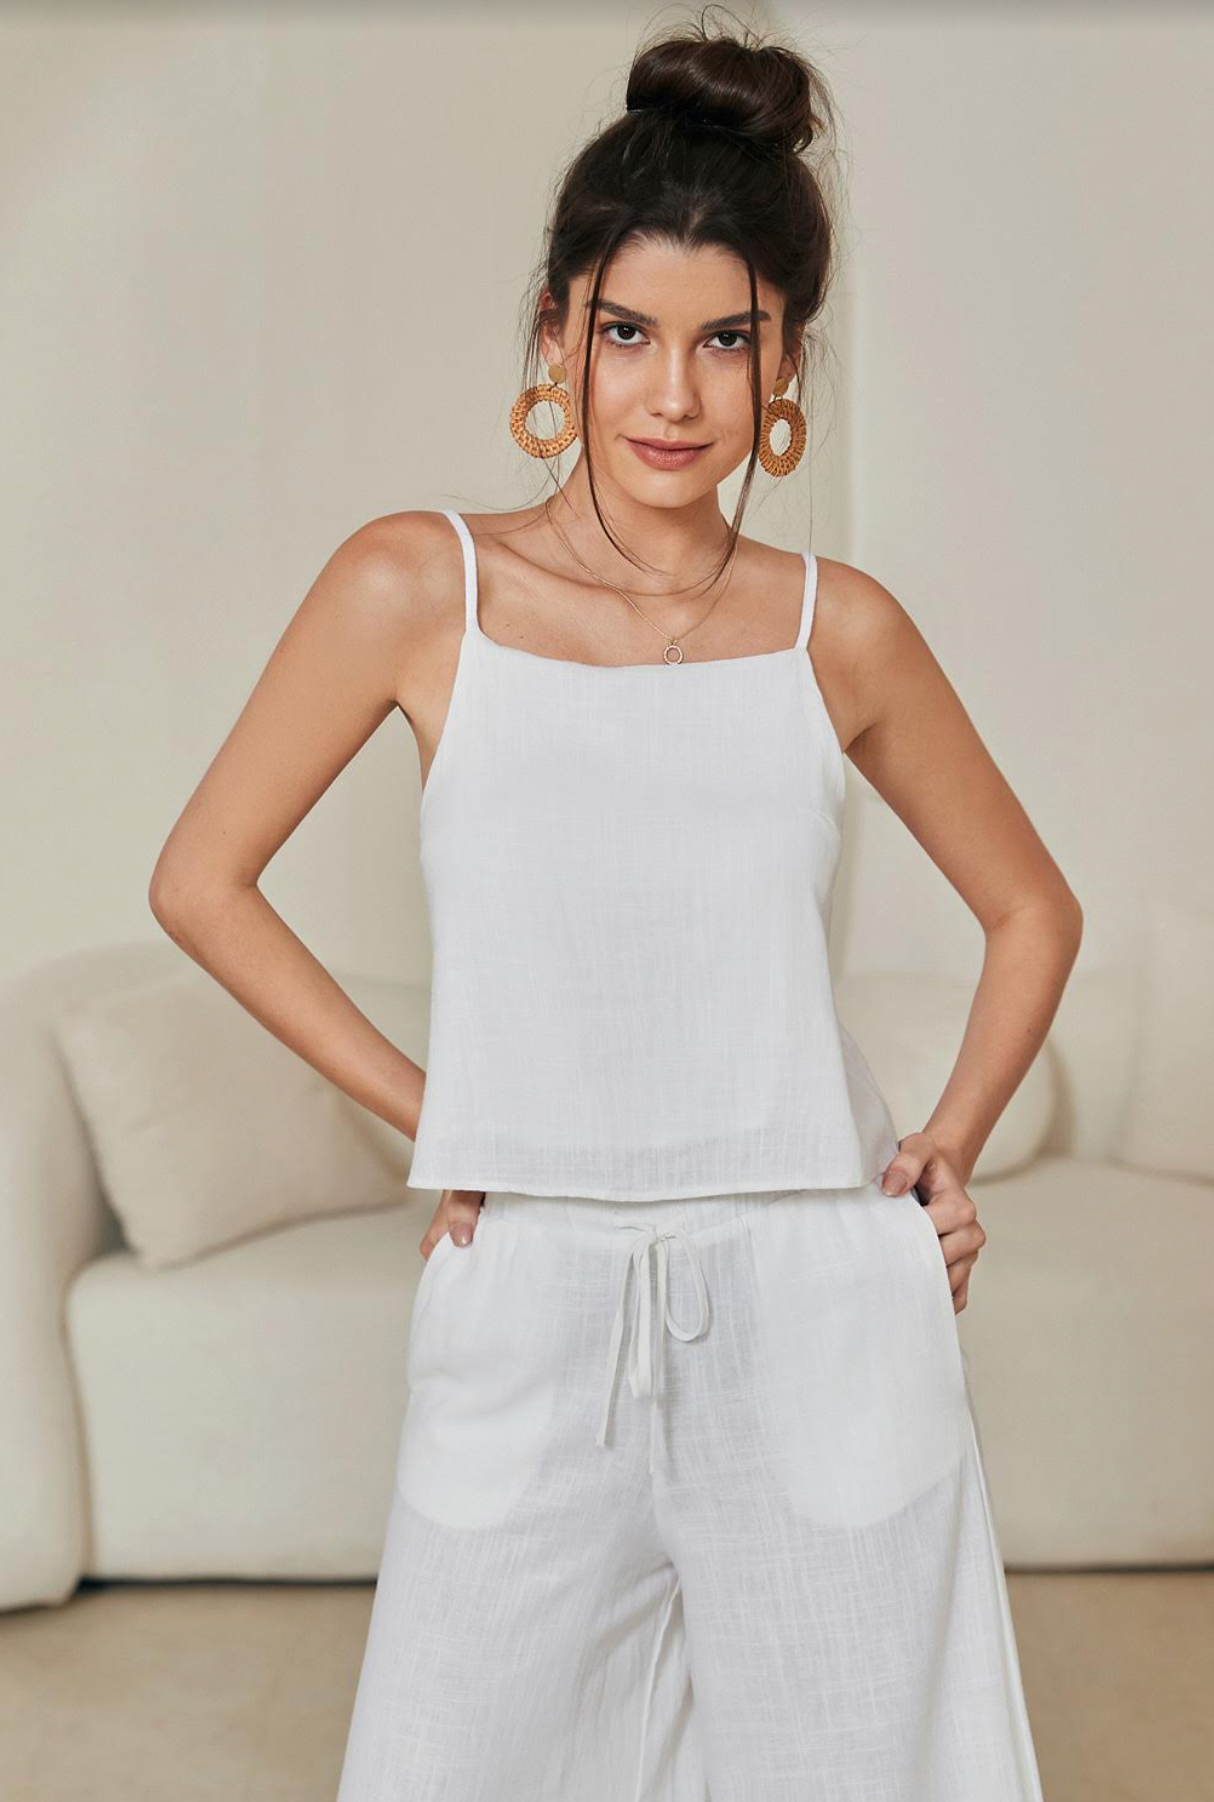 Discover effortless luxury with the Tara Linen Crop Top. Boasting gold-plated details, a tie-up back, a cropped length, and delicate spaghetti straps, this sophisticated piece is both timeless and eye-catching. The lined design ensures a comfortable fit, perfect for any special occasion.